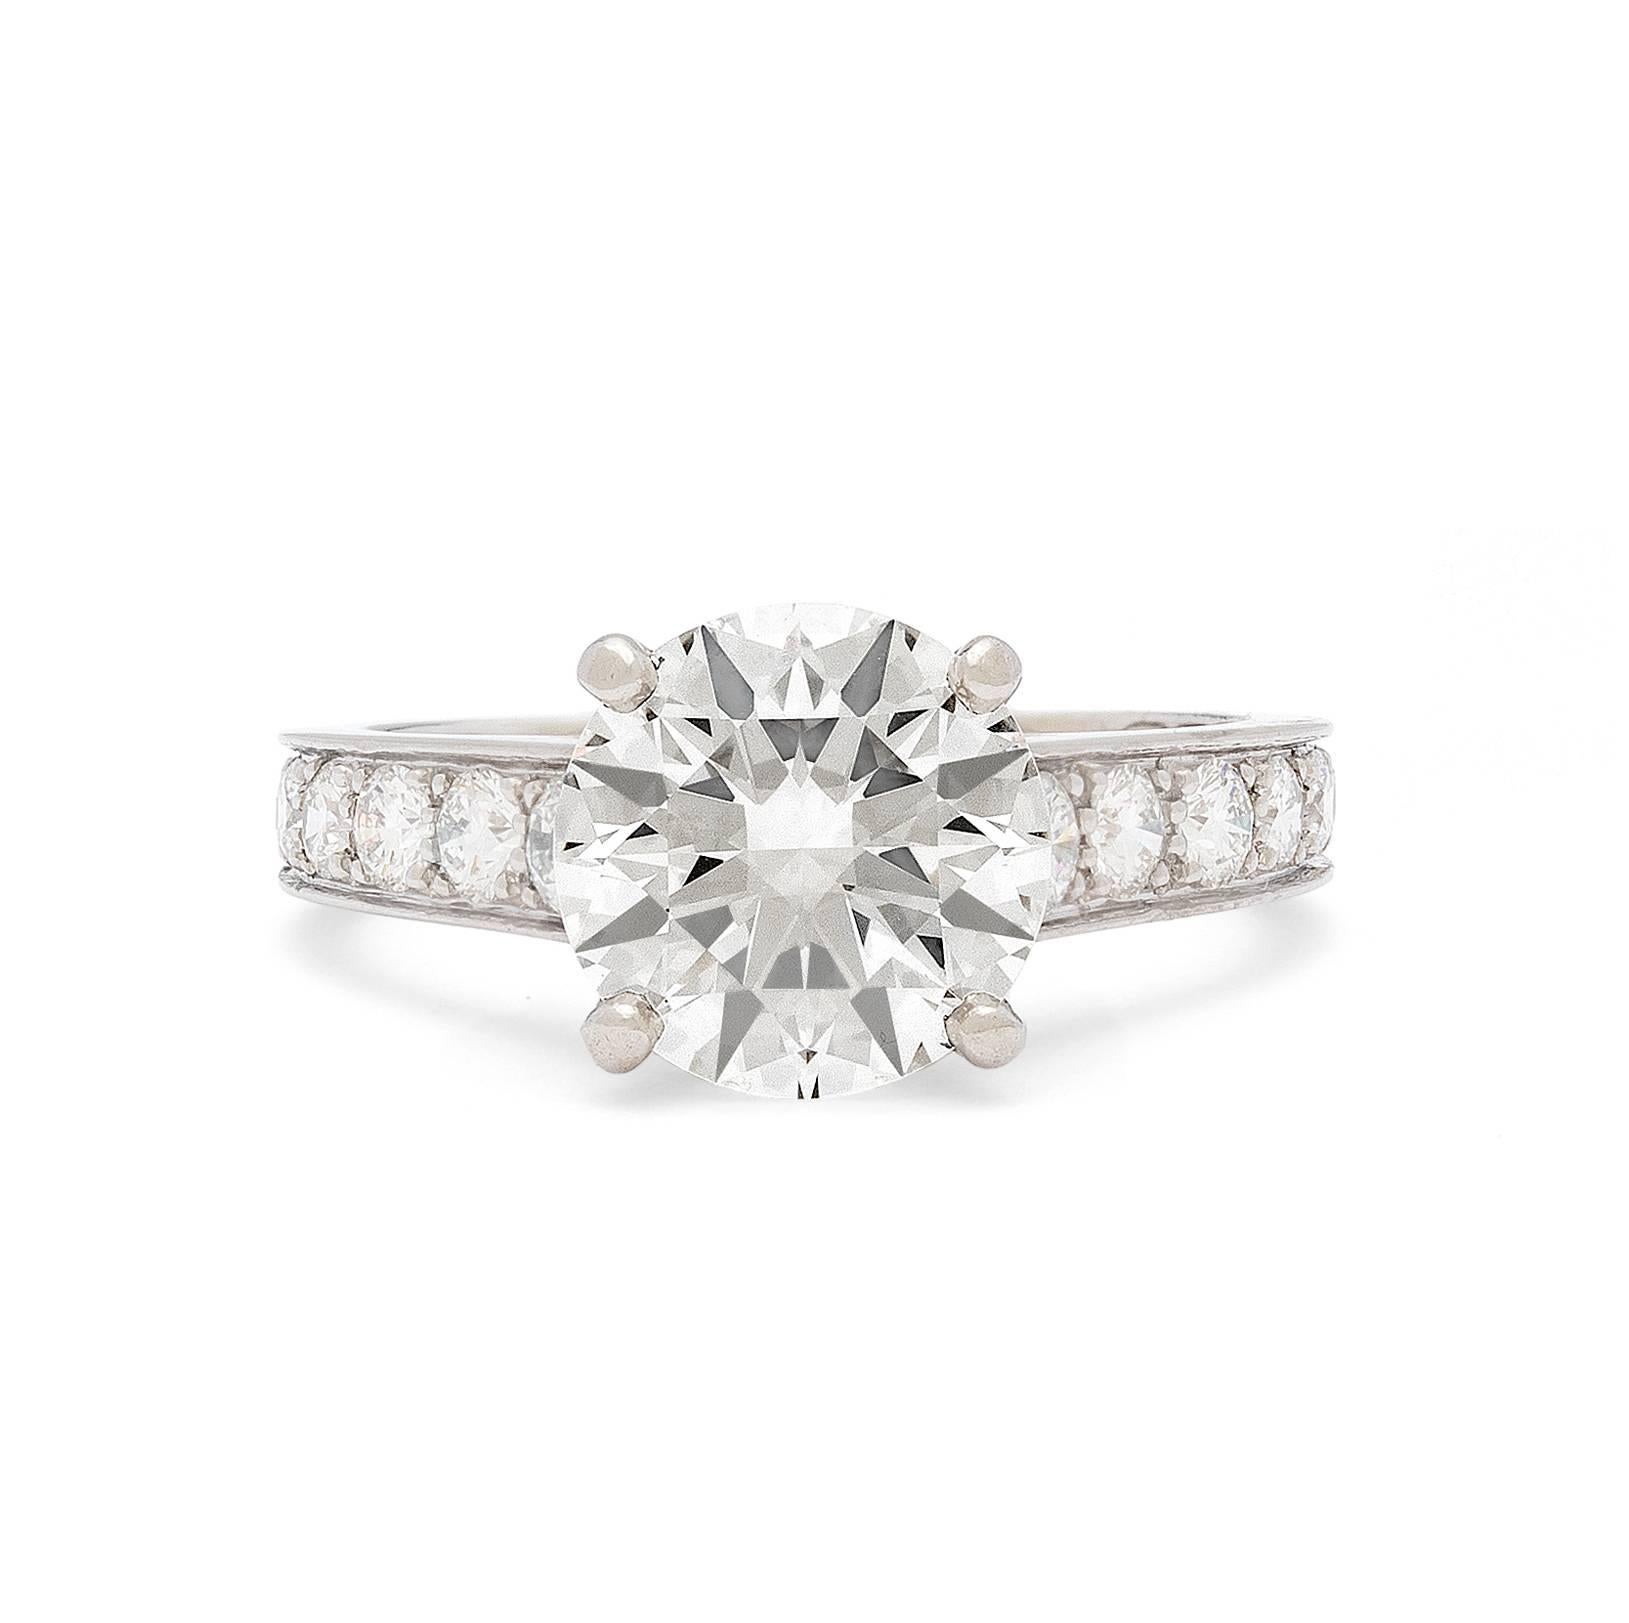 Cartier Solitaire 1895 collection platinum diamond engagement ring features a center 2.41 carat GIA cert round brilliant cut diamond accented with pave diamonds totaling 0.90.  Ring size is a 4.75.  An outstanding Cartier engagement ring.